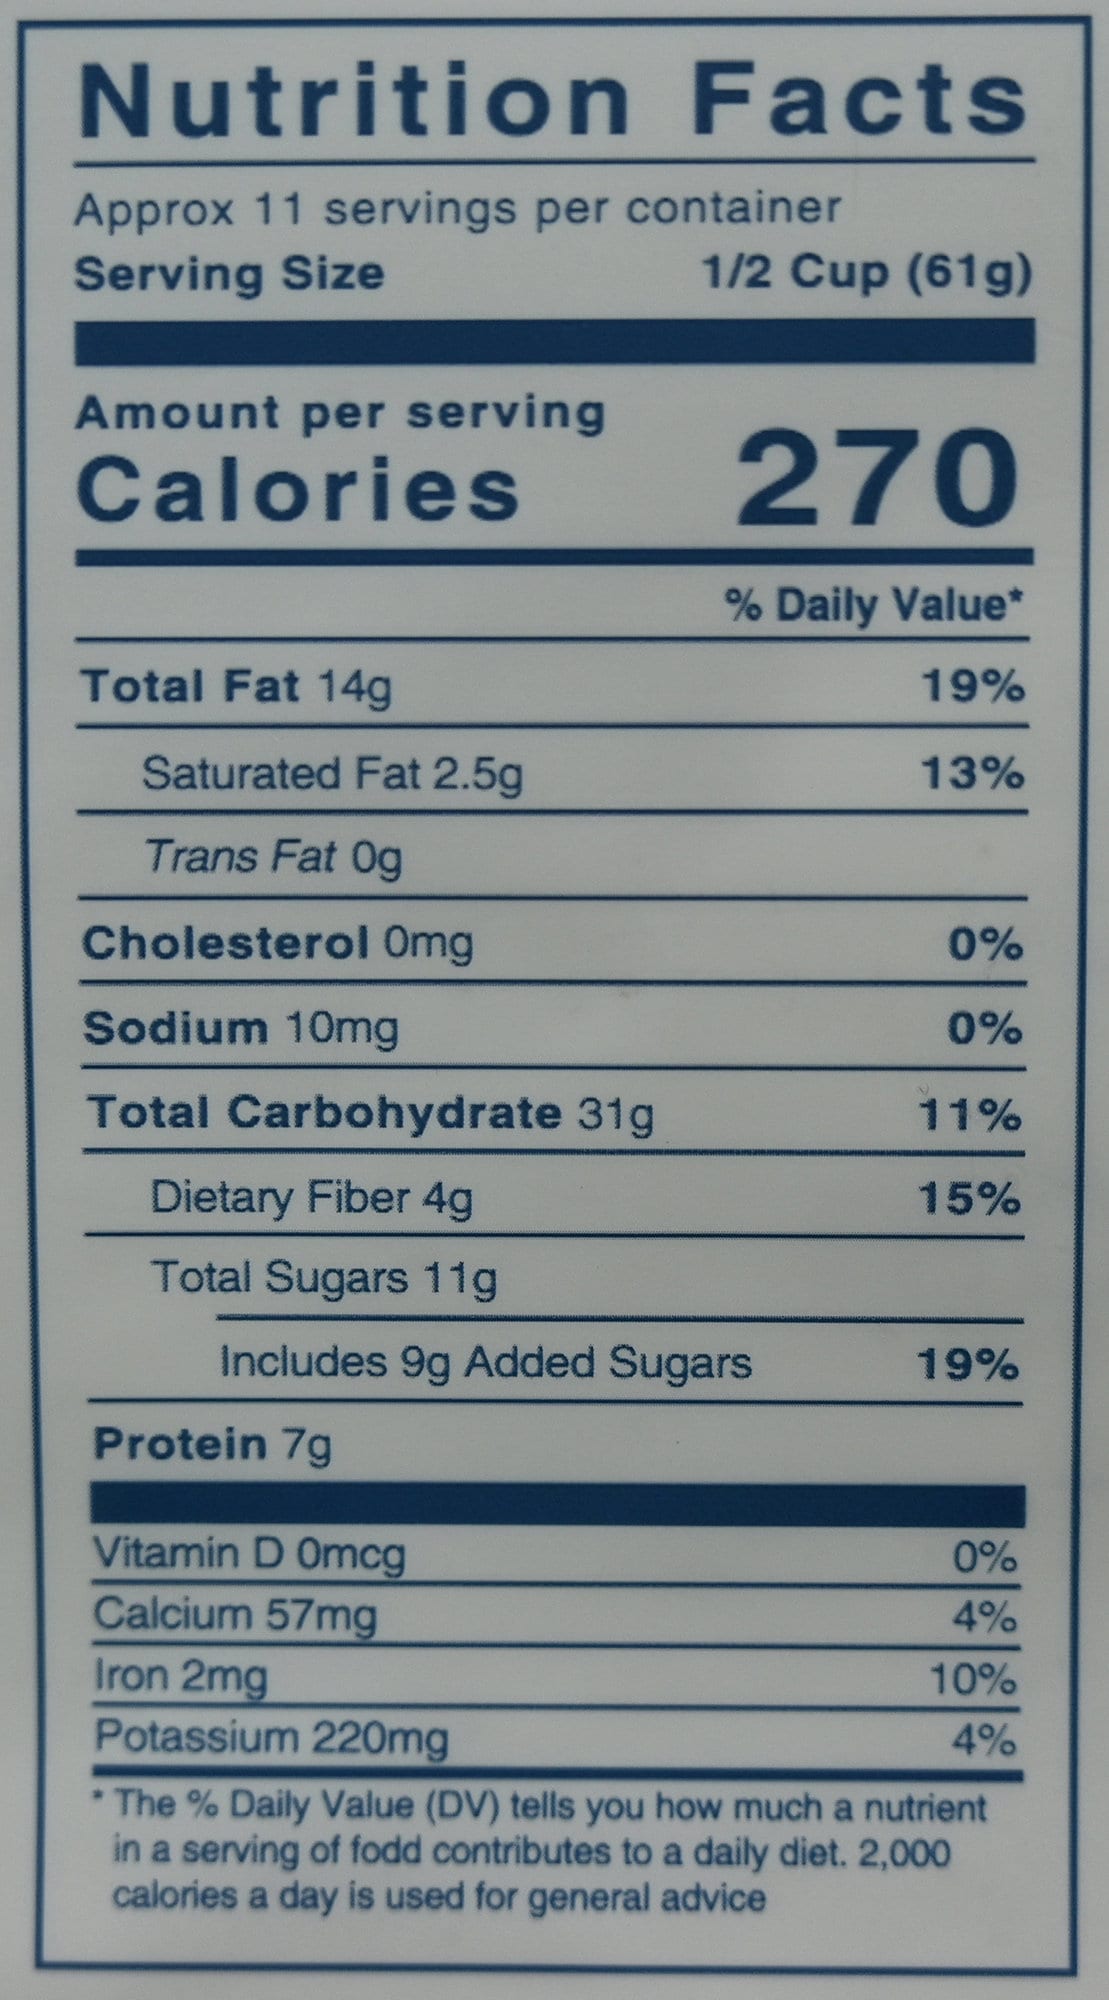 Image of the nutrition facts for the granola from the back of the bag.